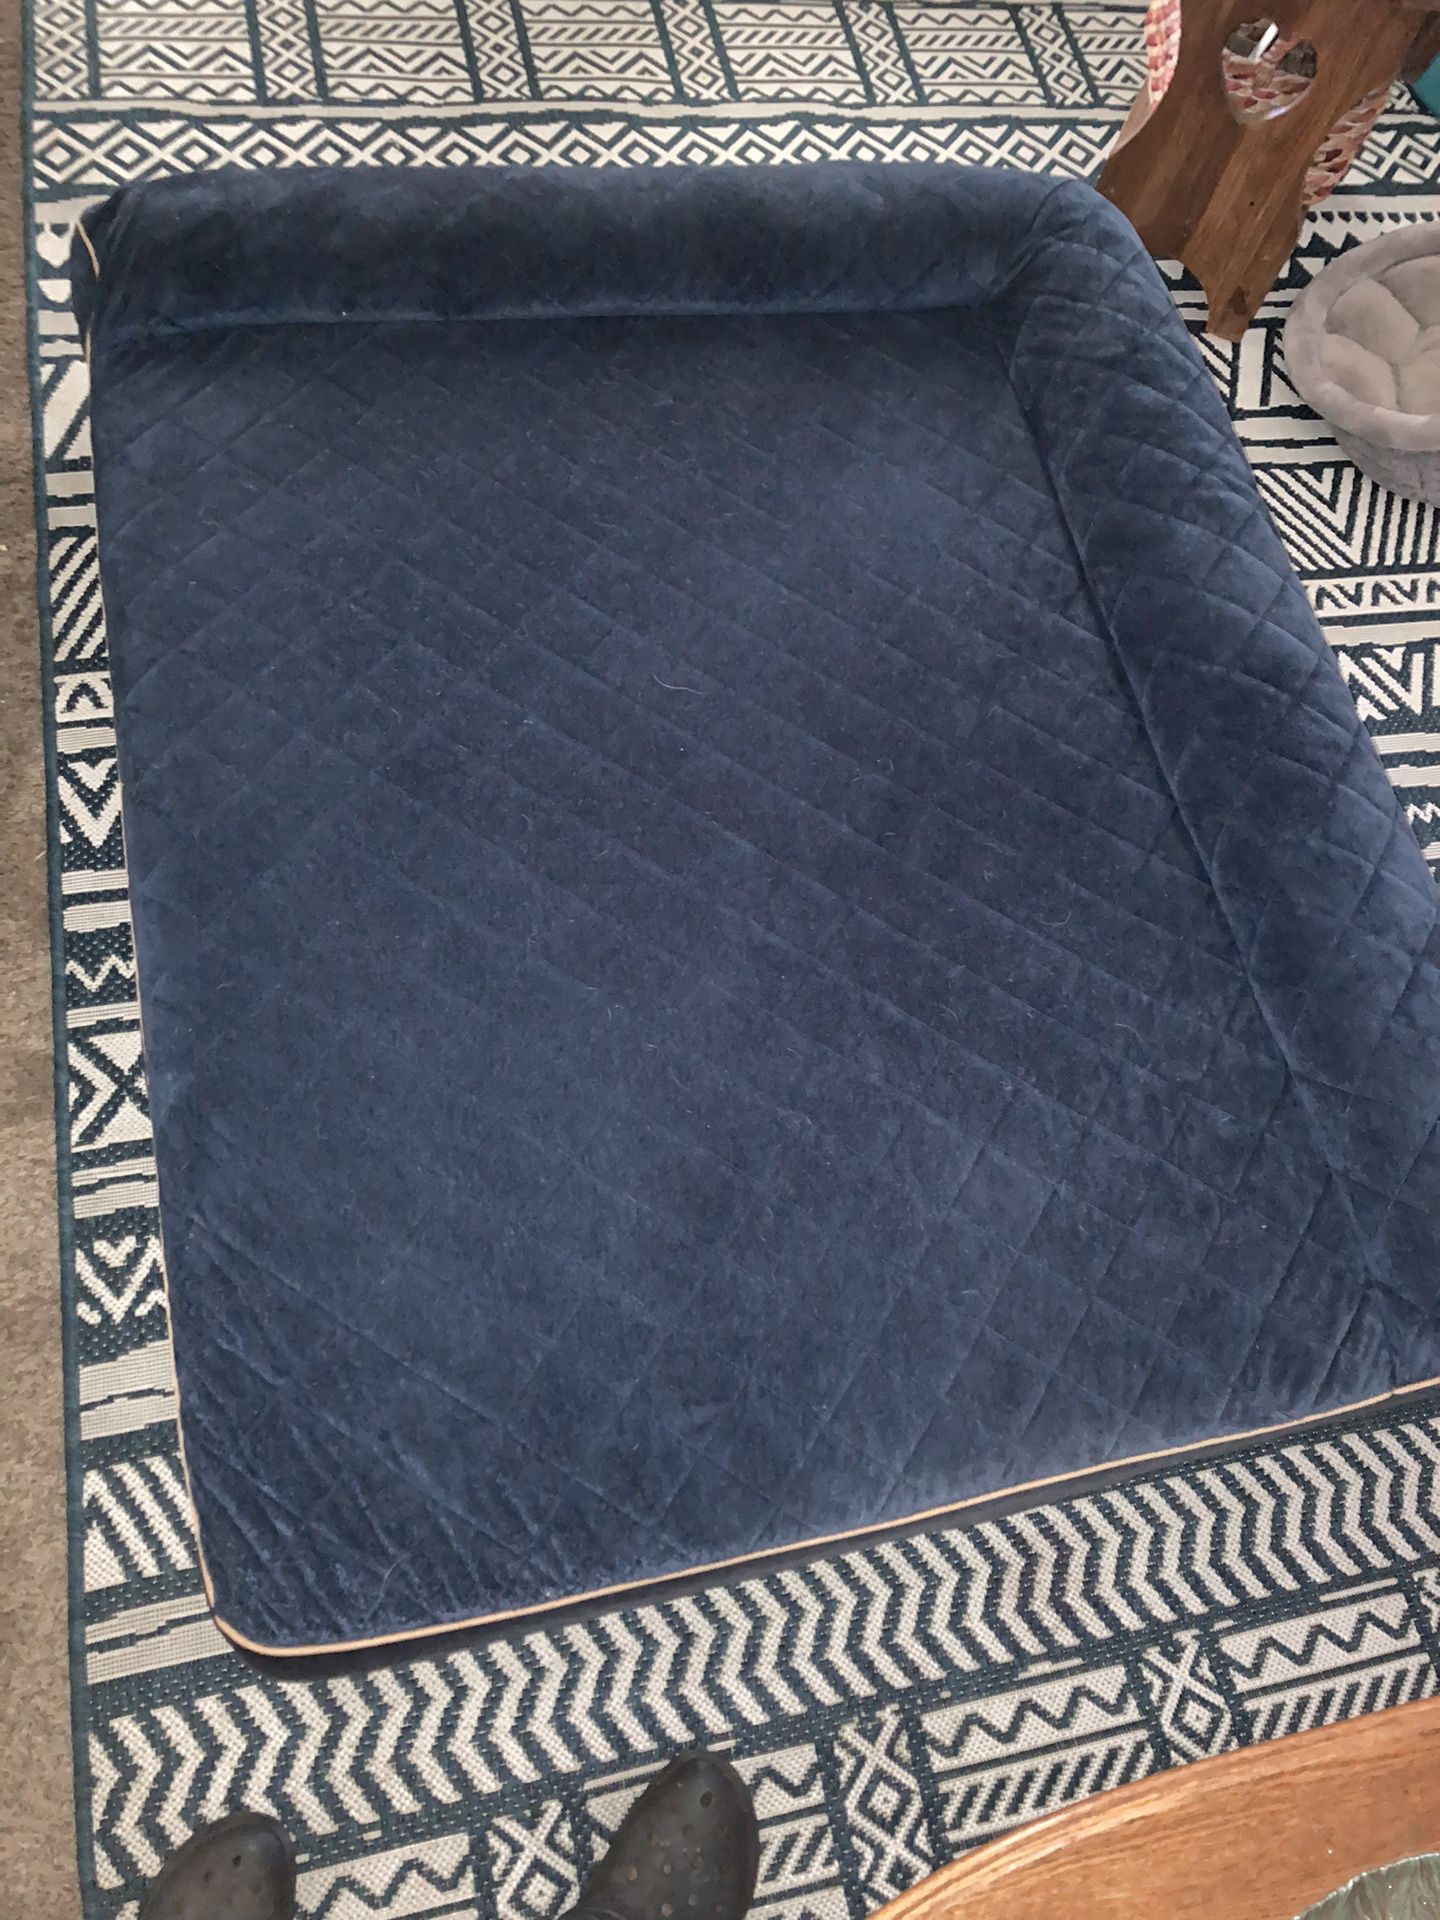 Large Quilted Orthopedic Dog Bed 